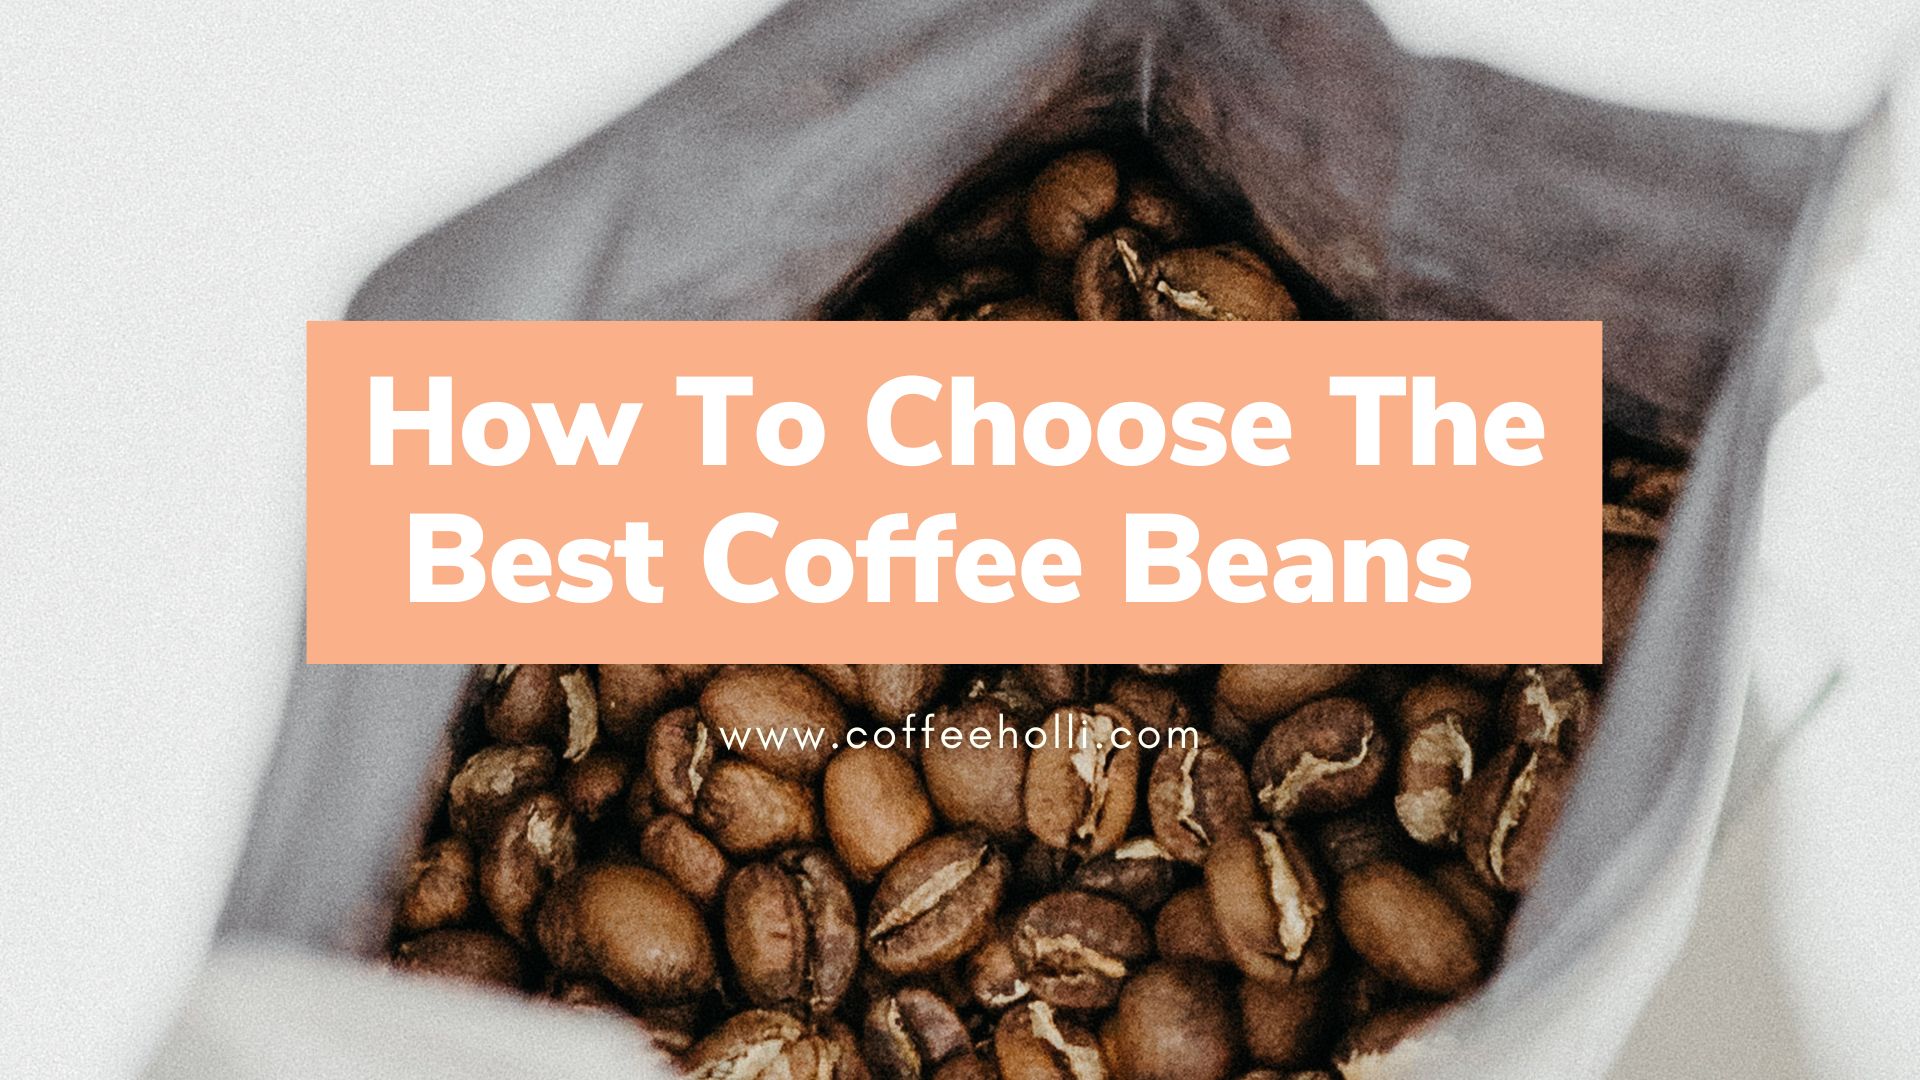 How To Choose The Best Coffee Beans